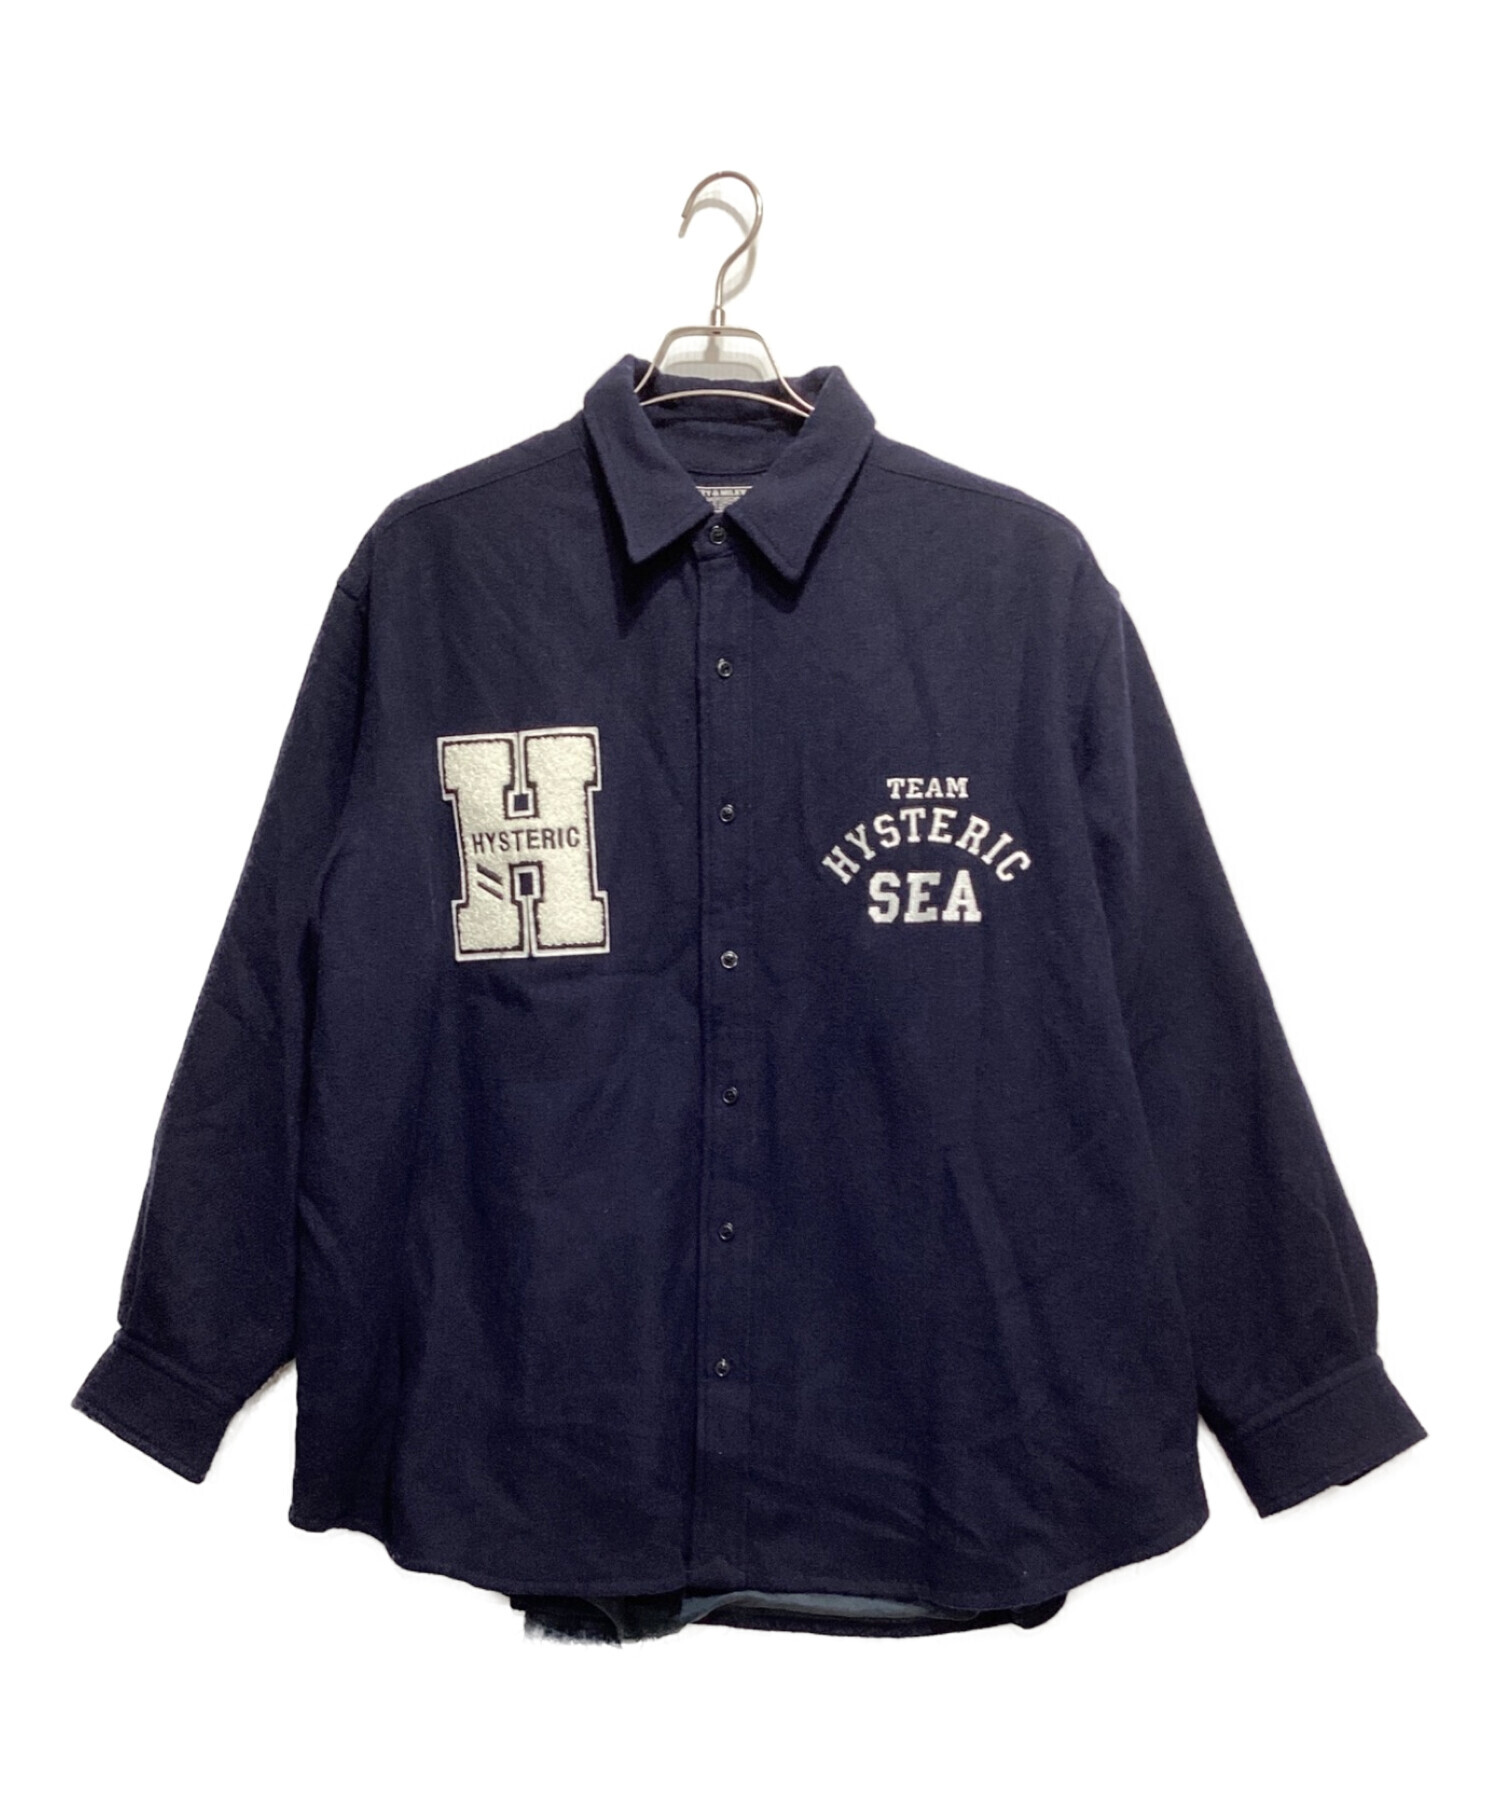 WIND AND SEA × HYSTERIC GLAMOUR NAVY Lネイビーとなっています